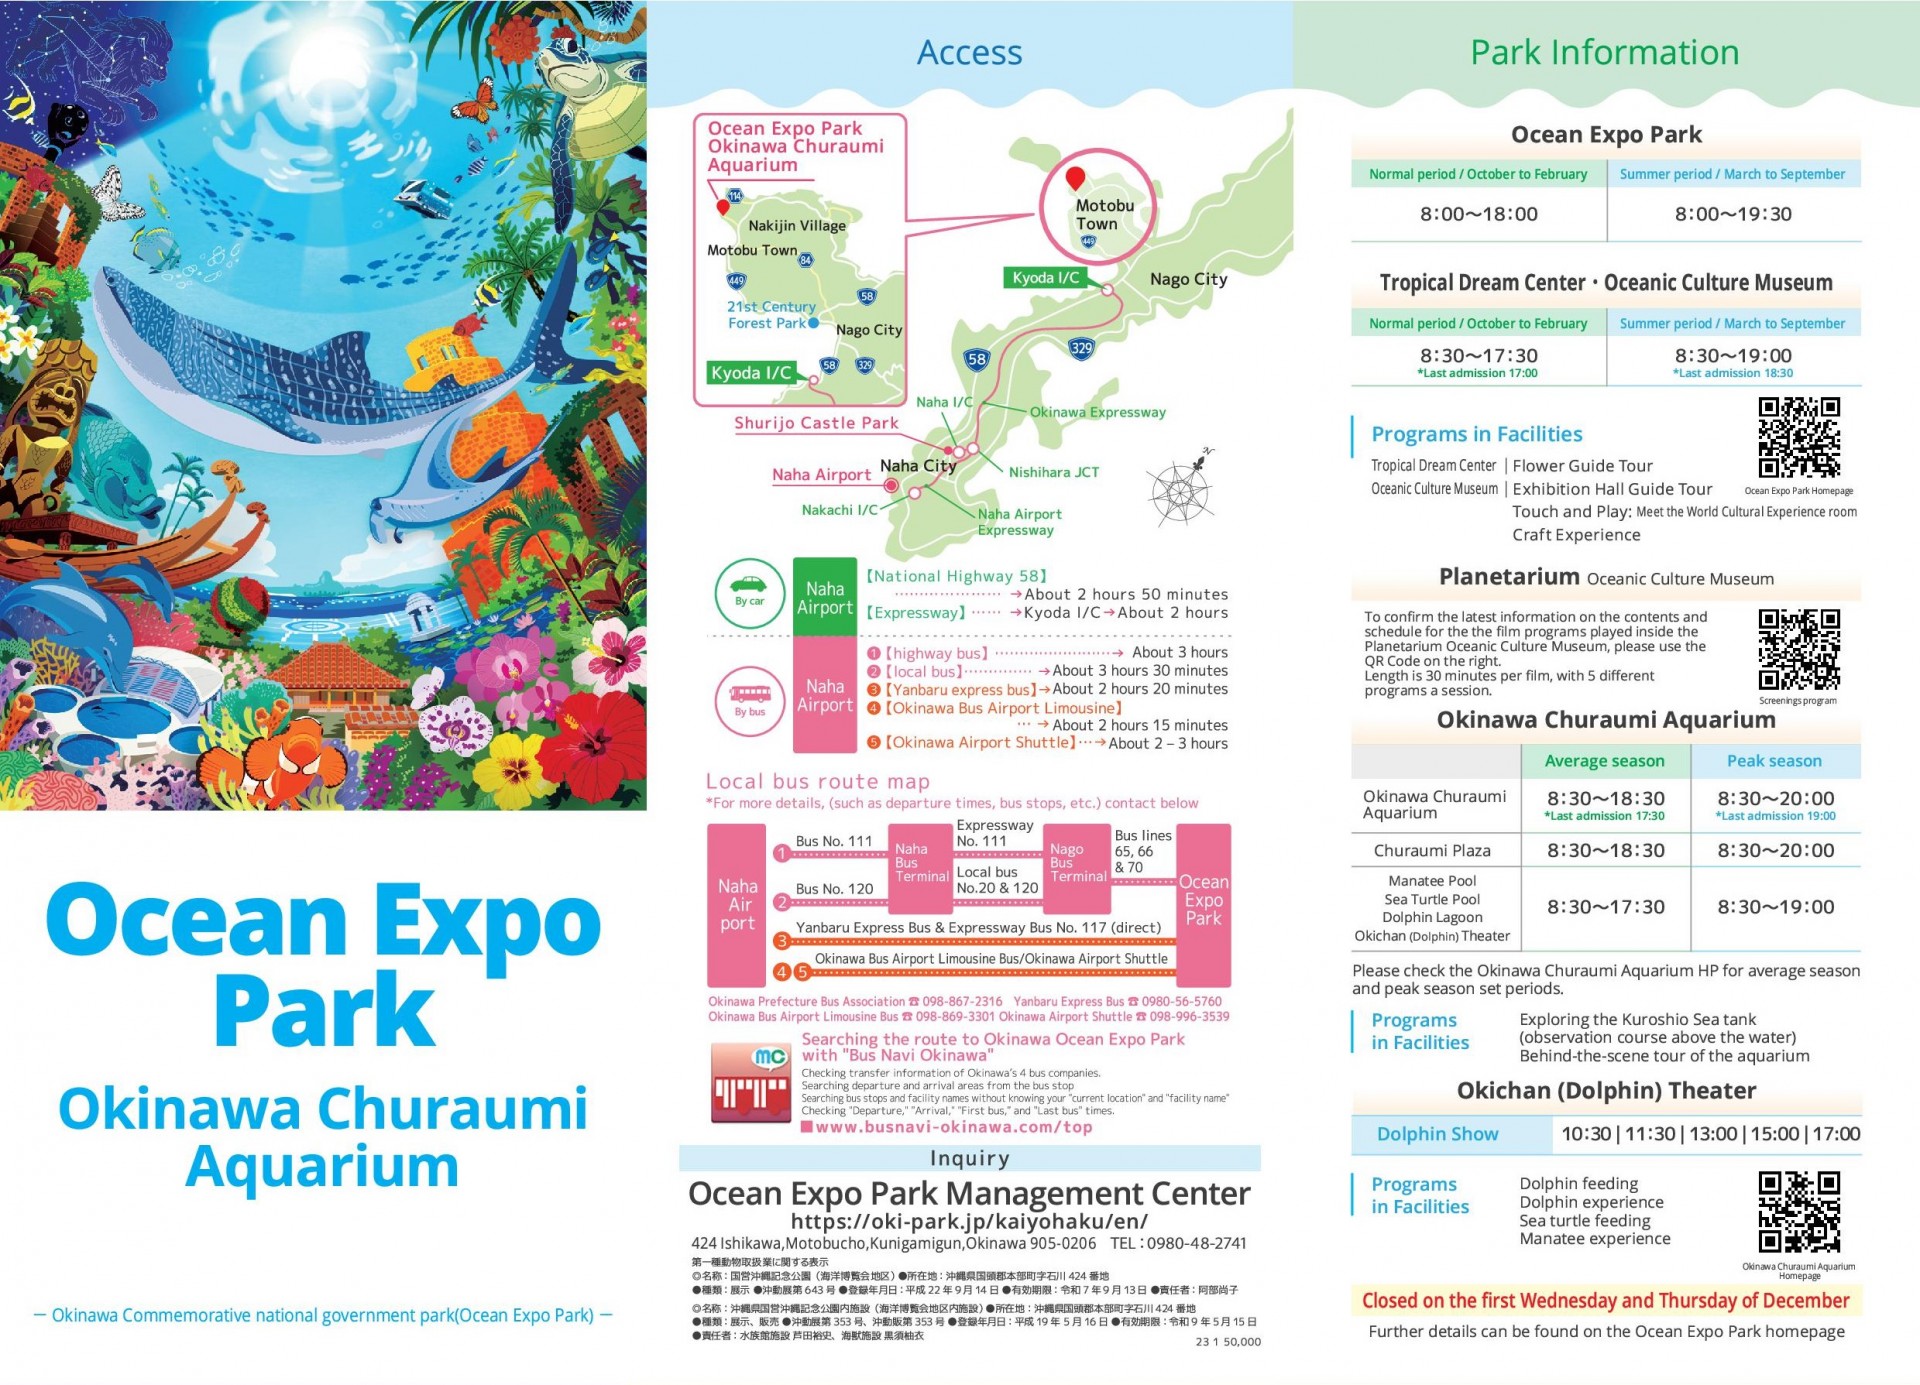 The entire map of Ocean Expo Park download